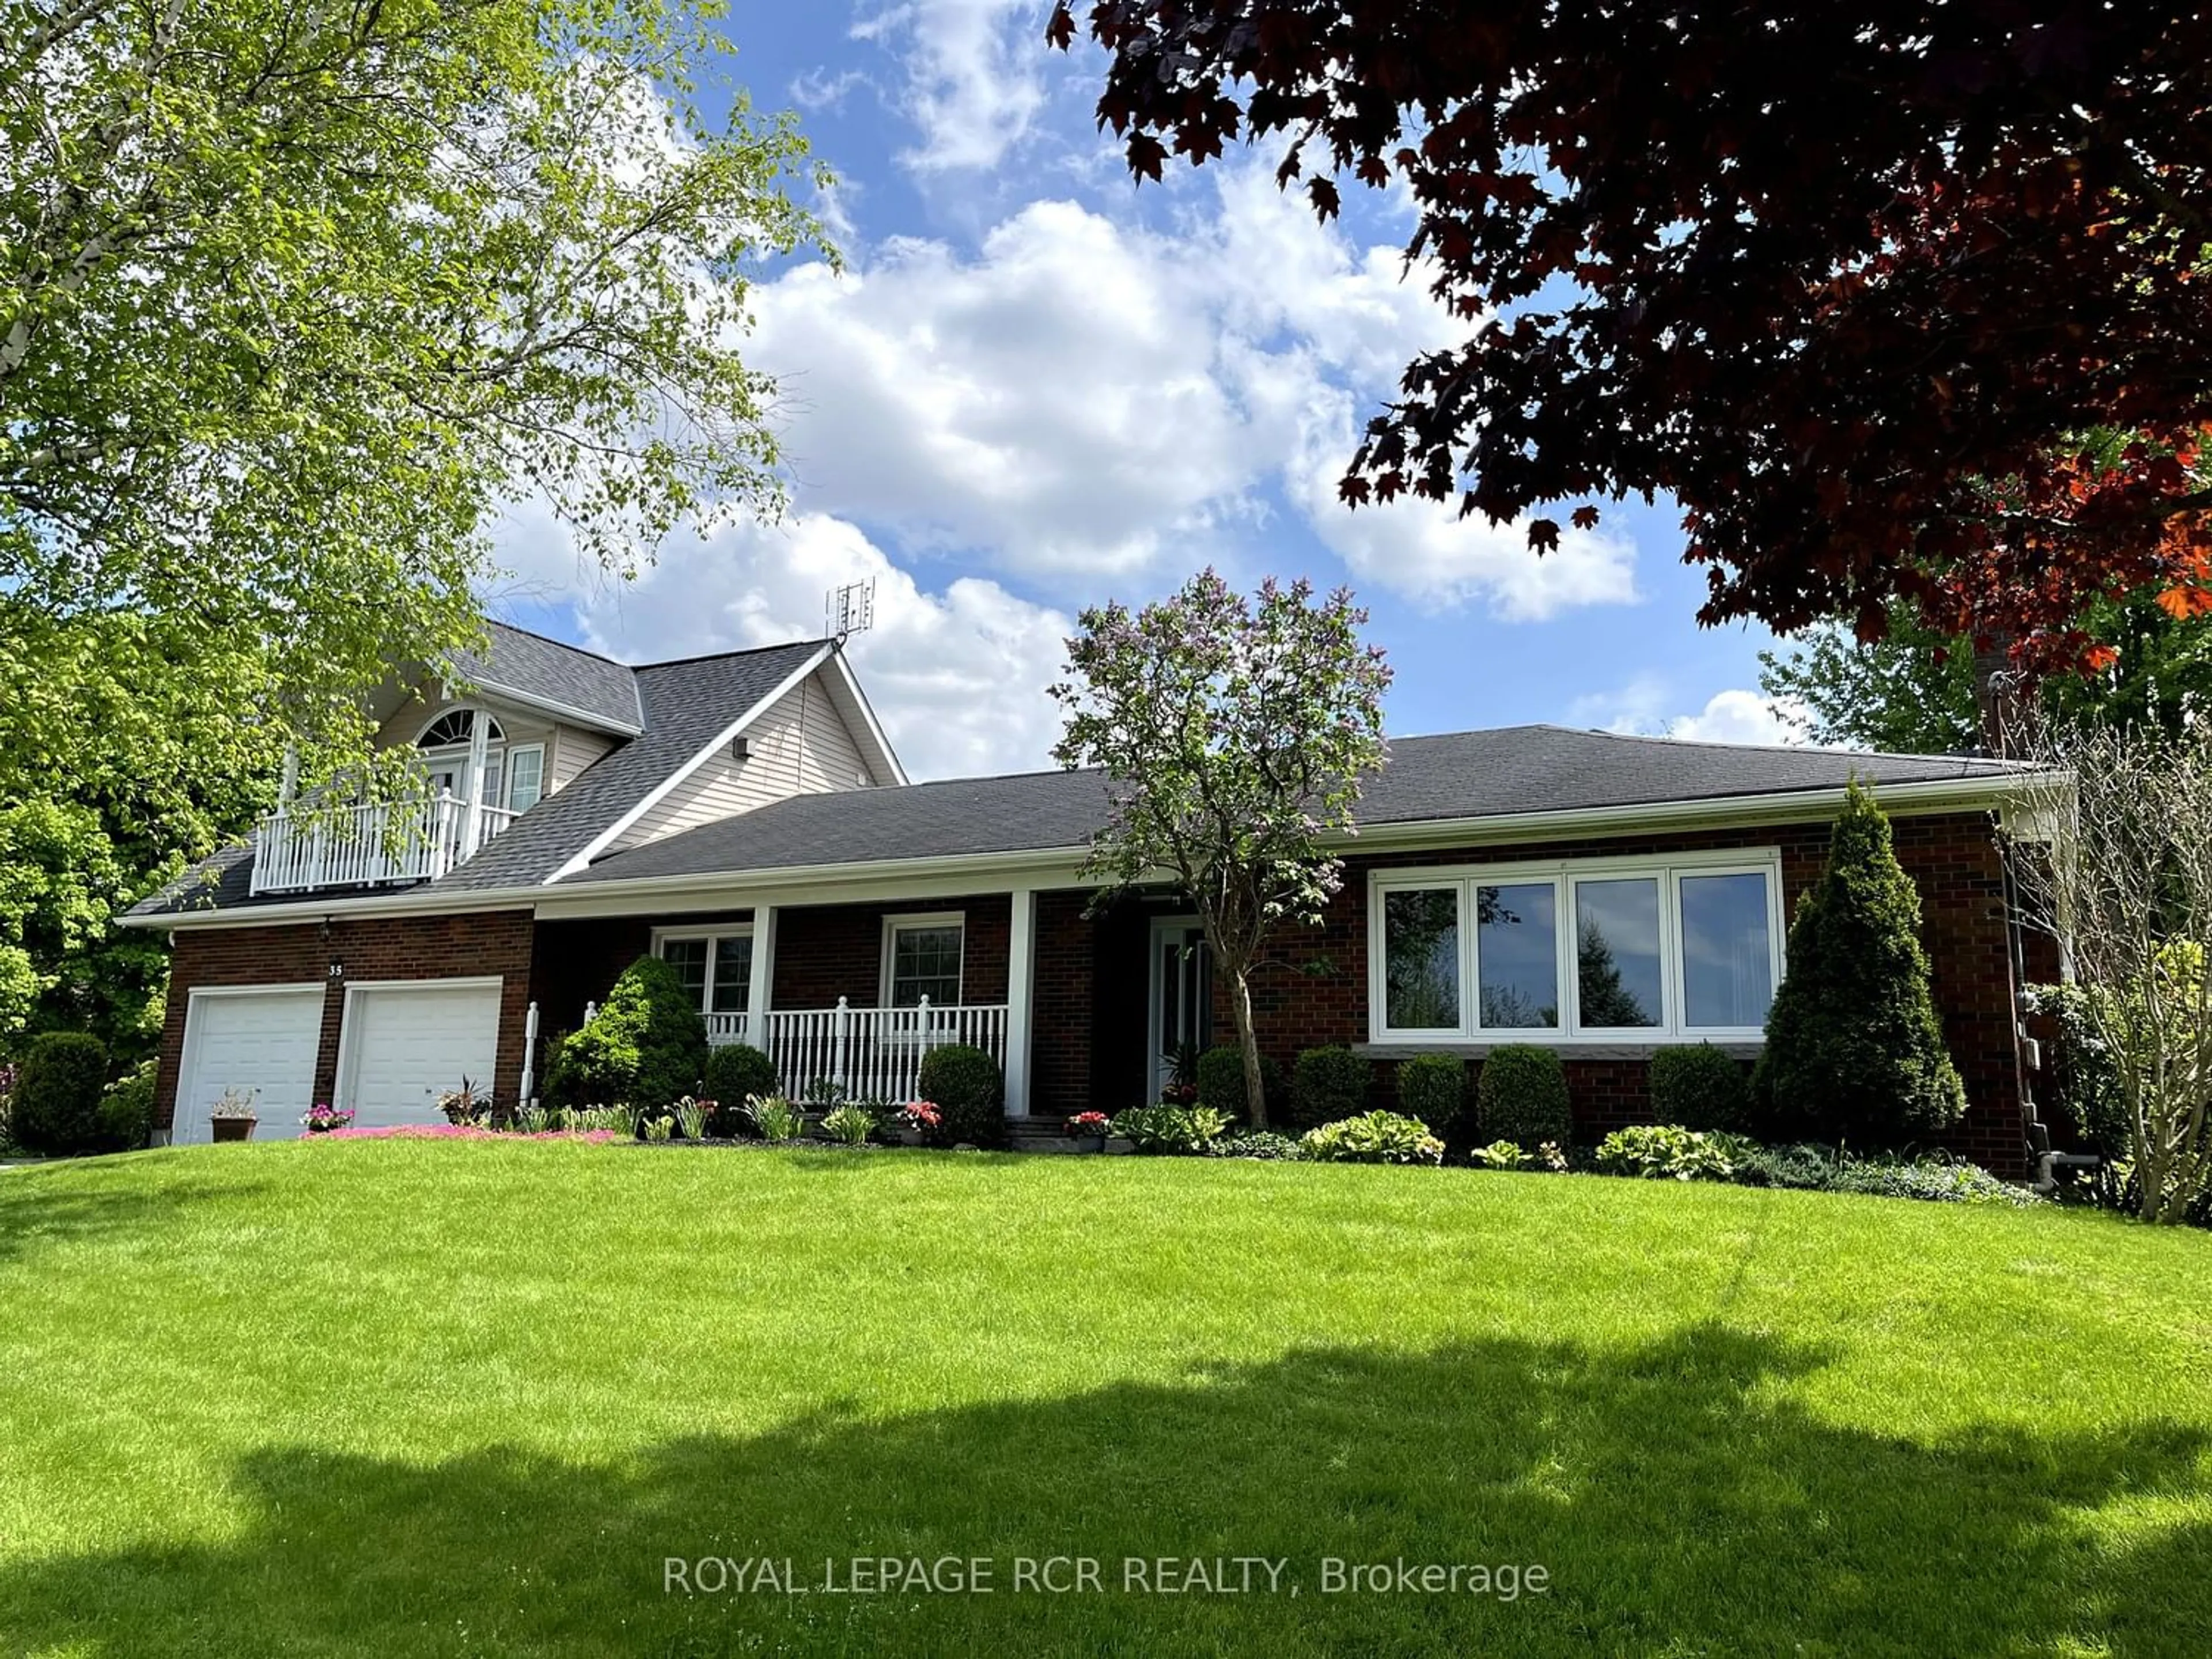 Home with brick exterior material for 35 Milne Lane, East Gwillimbury Ontario L0G 1R0